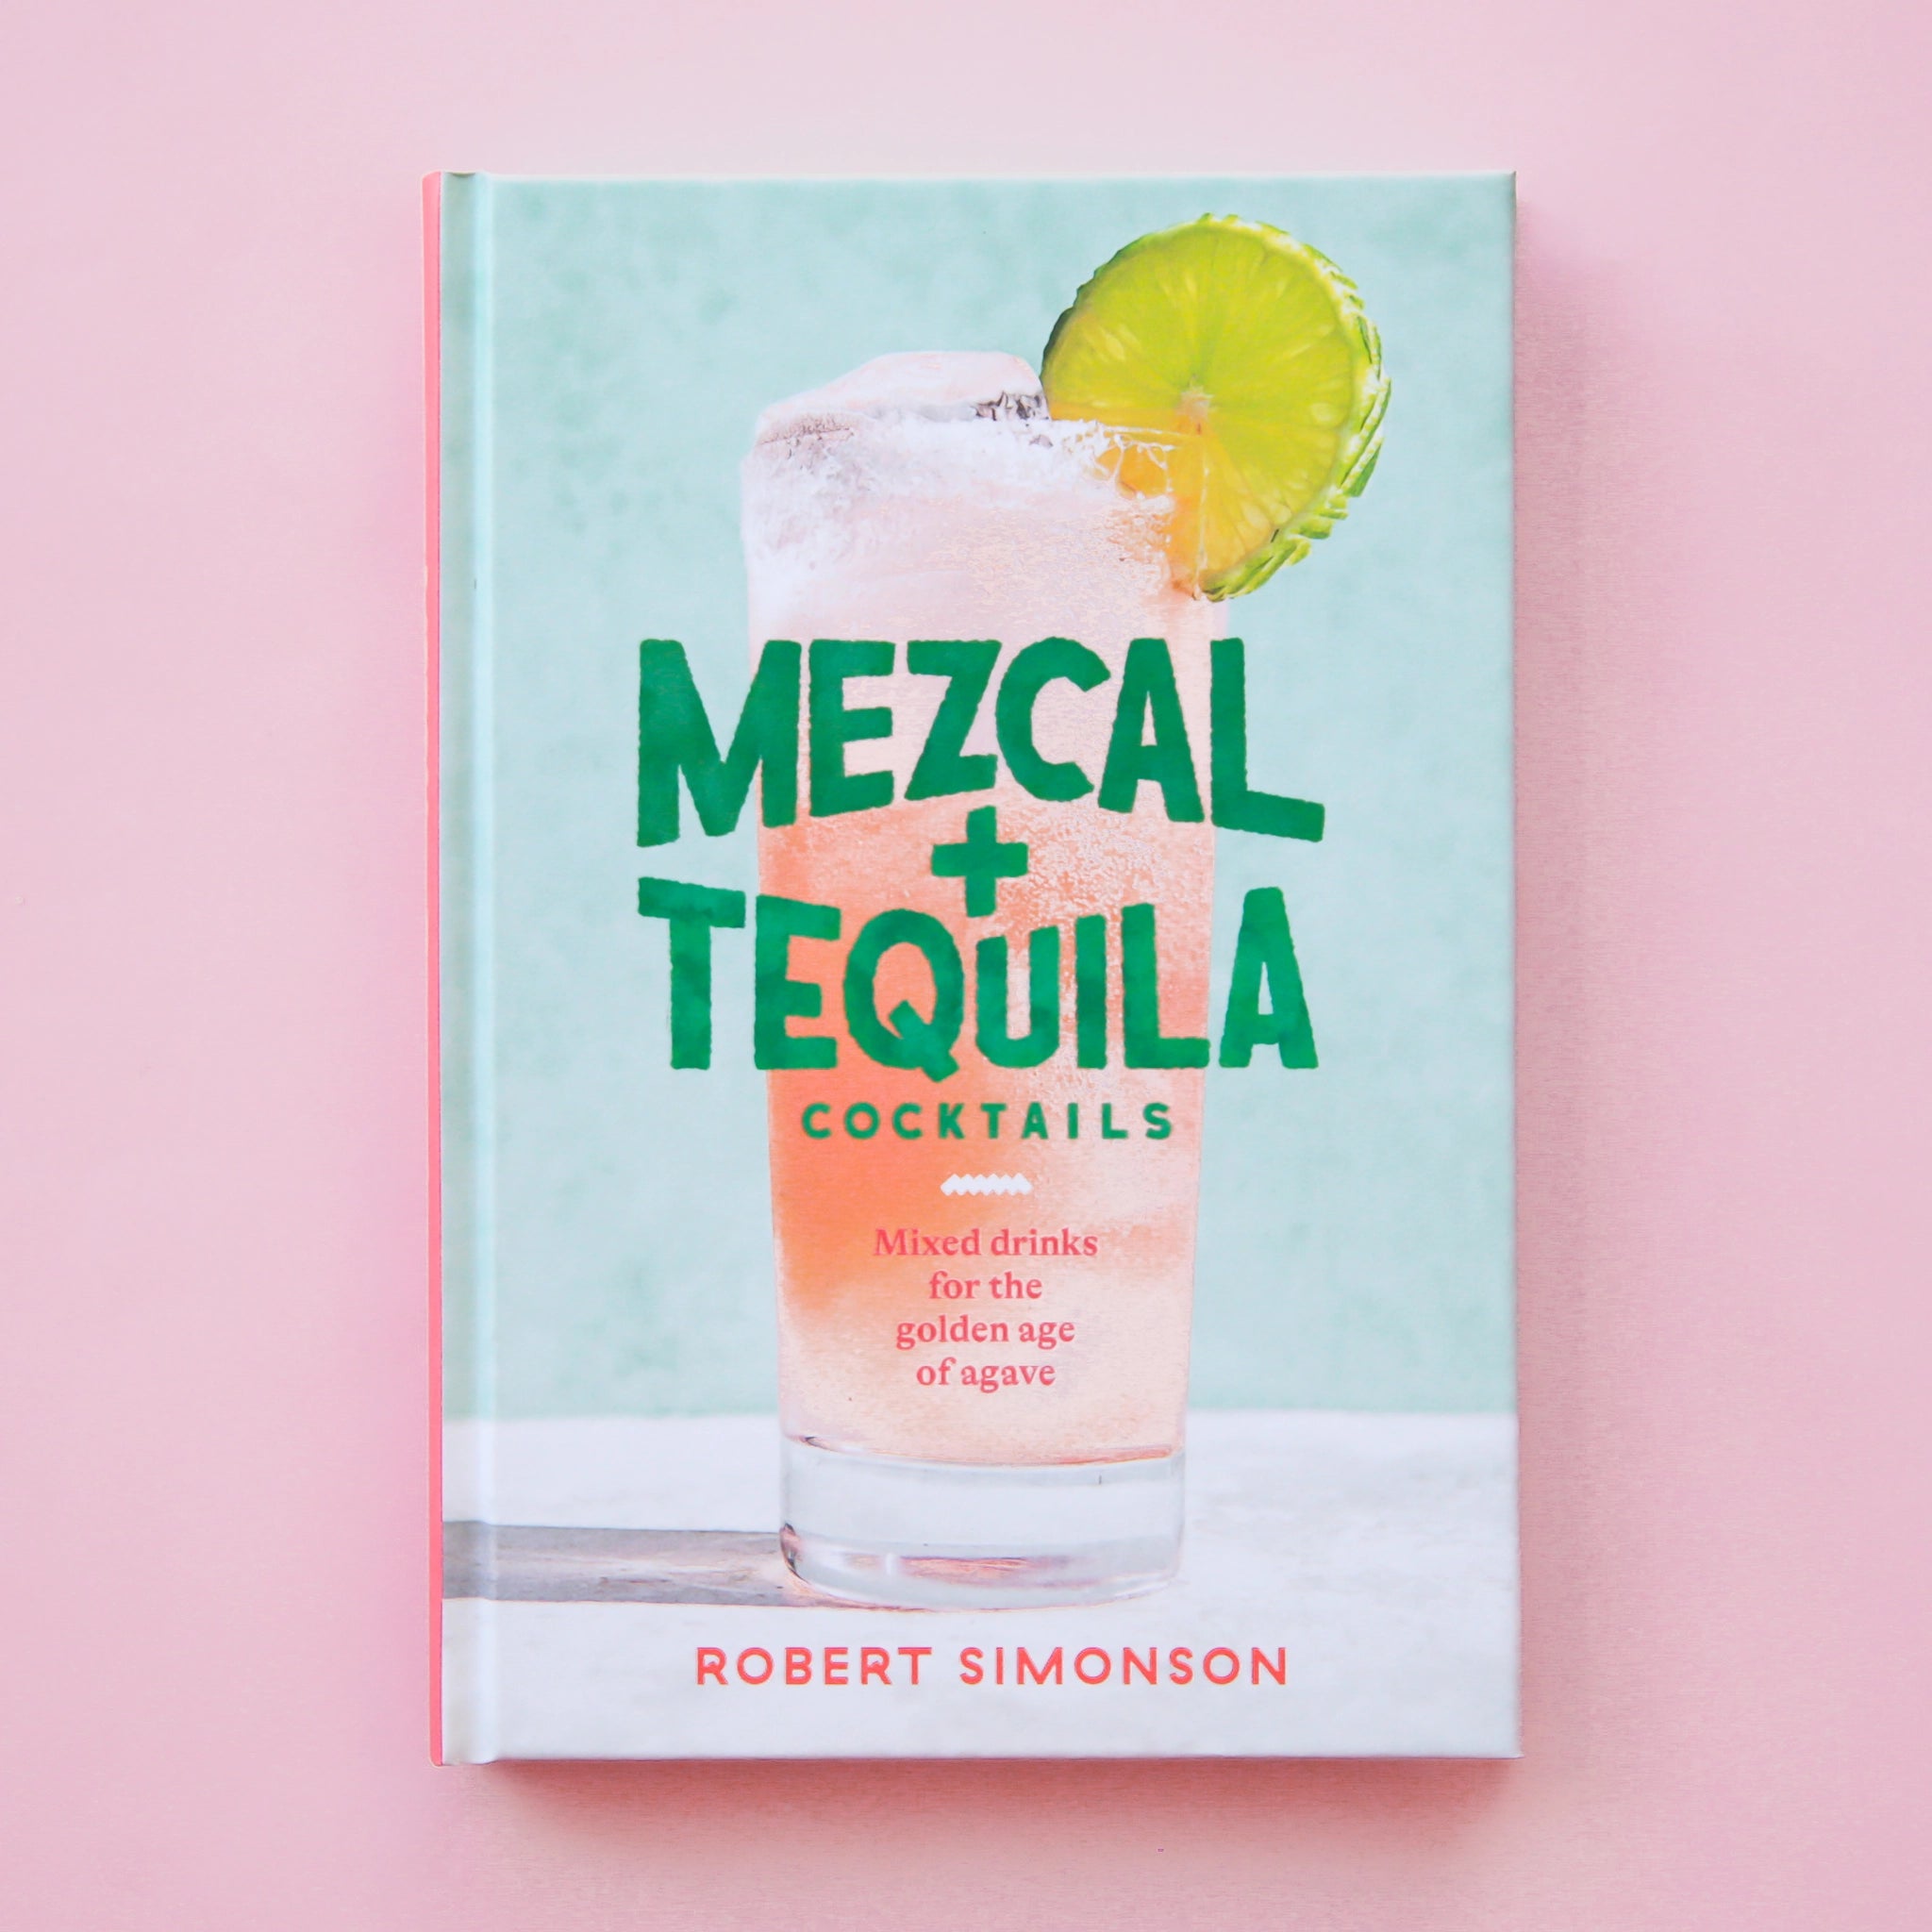 A light blue book cover with a pink tropical cocktail on the front with the title, &quot;Mezcal + Tequila Cocktails&quot; in teal blue lettering.